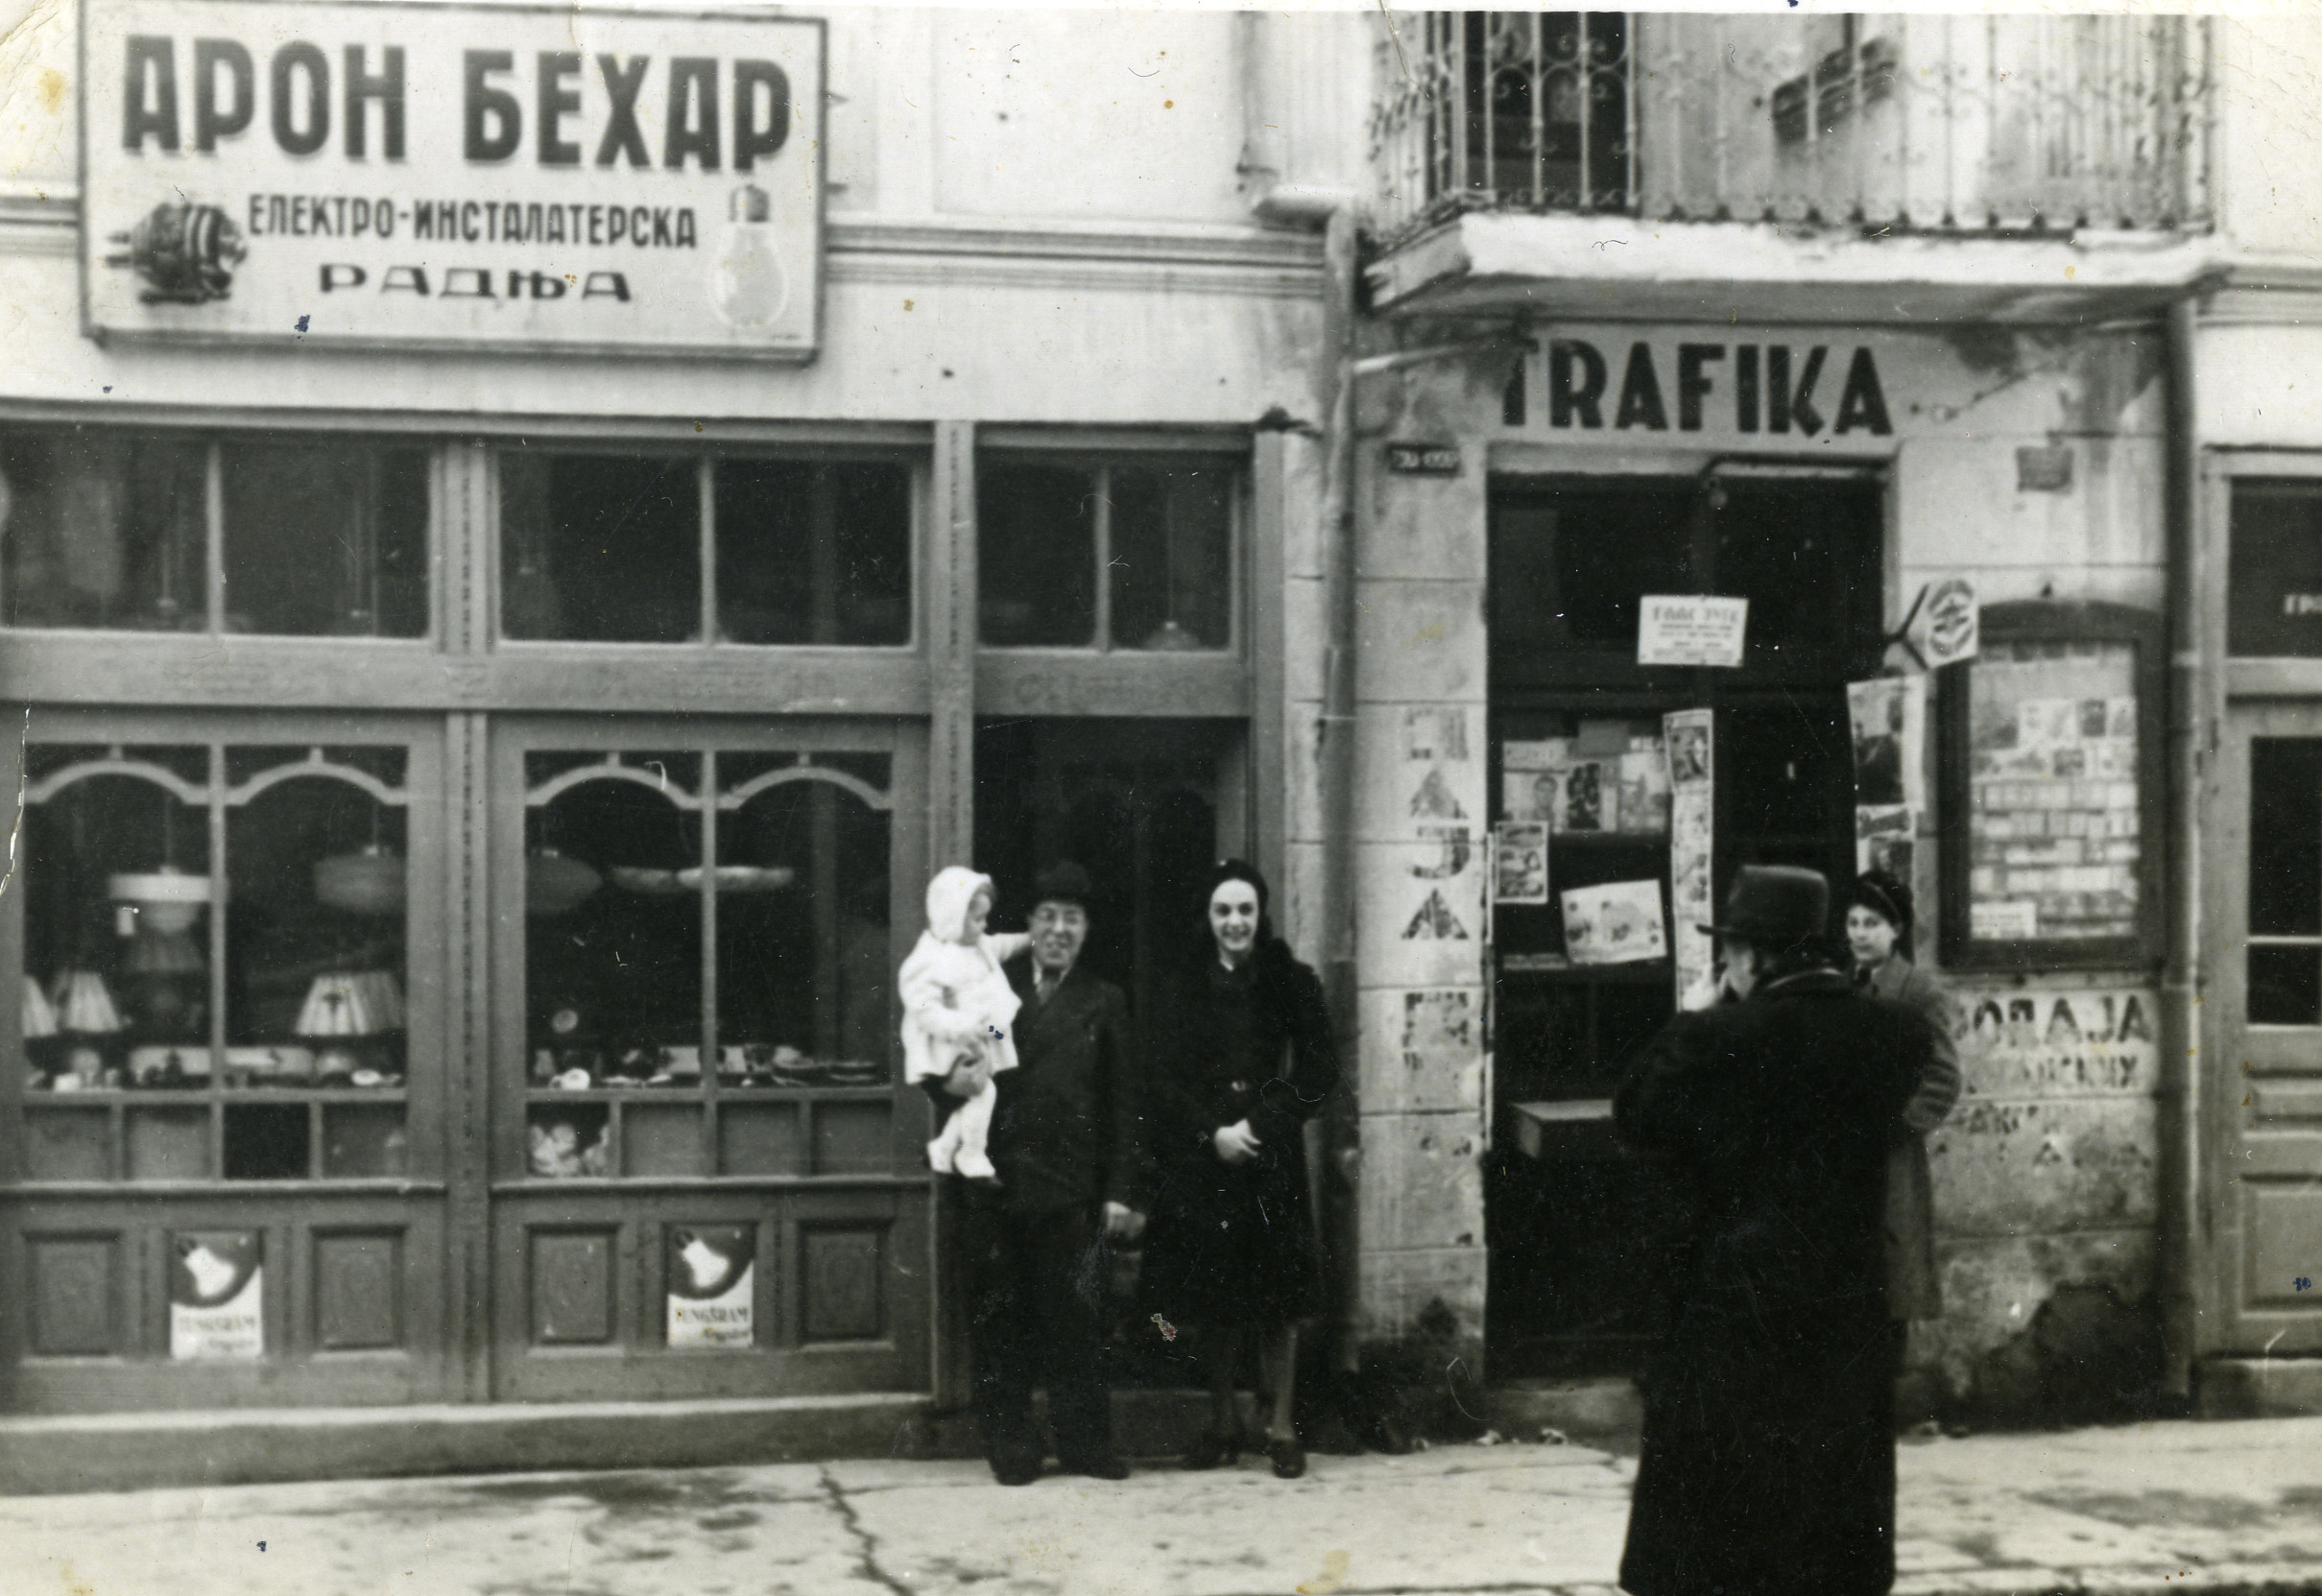 A Jewish couple with their baby daughter, in front of their electrical goods store.

Pictured are Aharon and Rebeka Behar, with baby Bienonida.